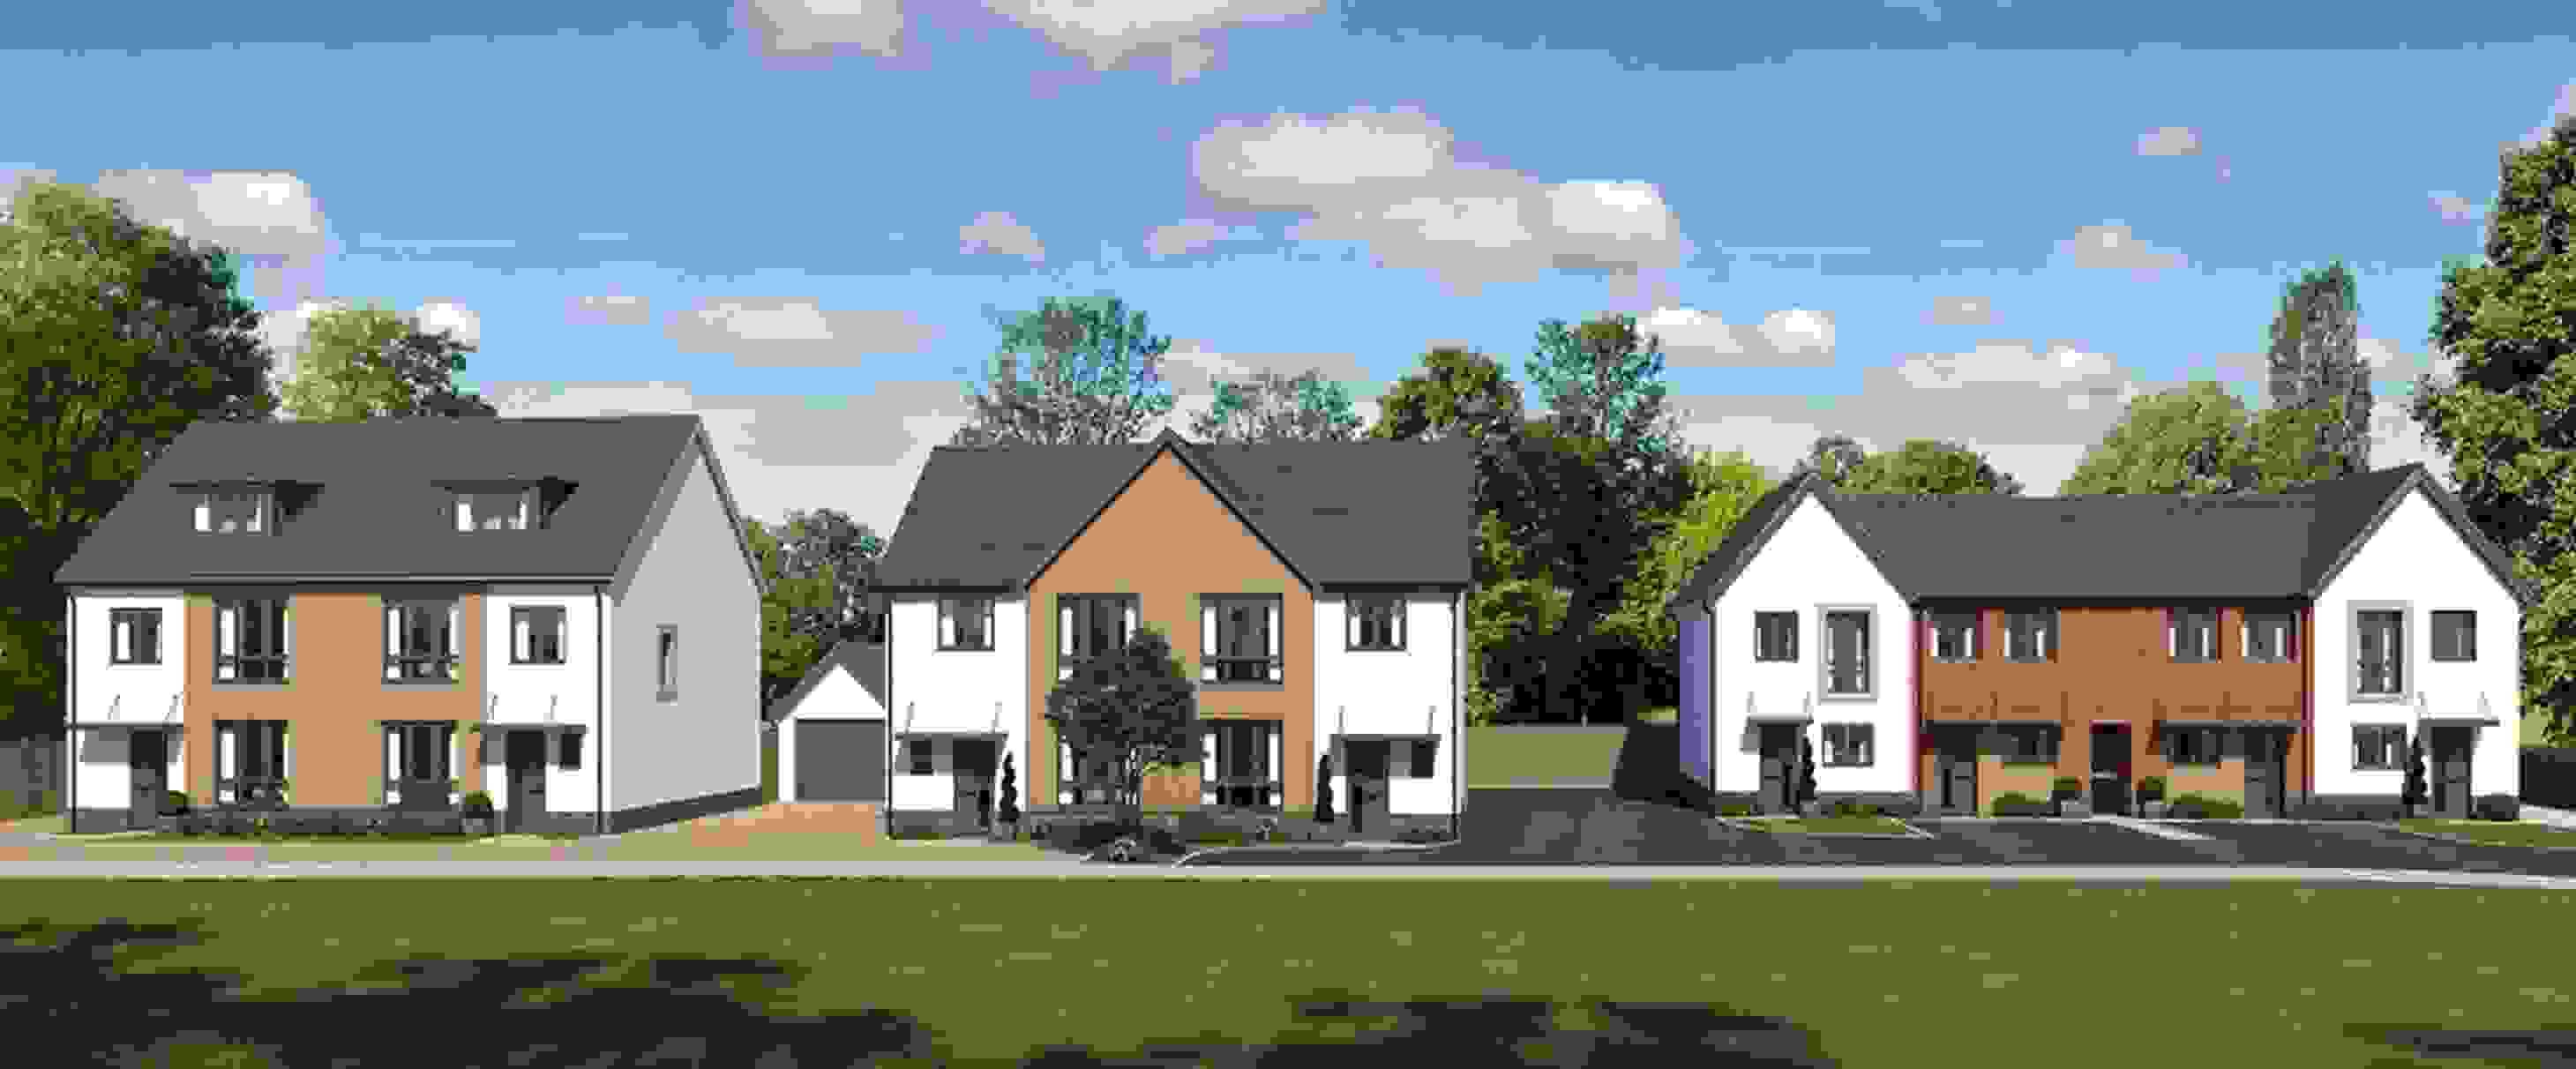 A row of new homes on a housing development.